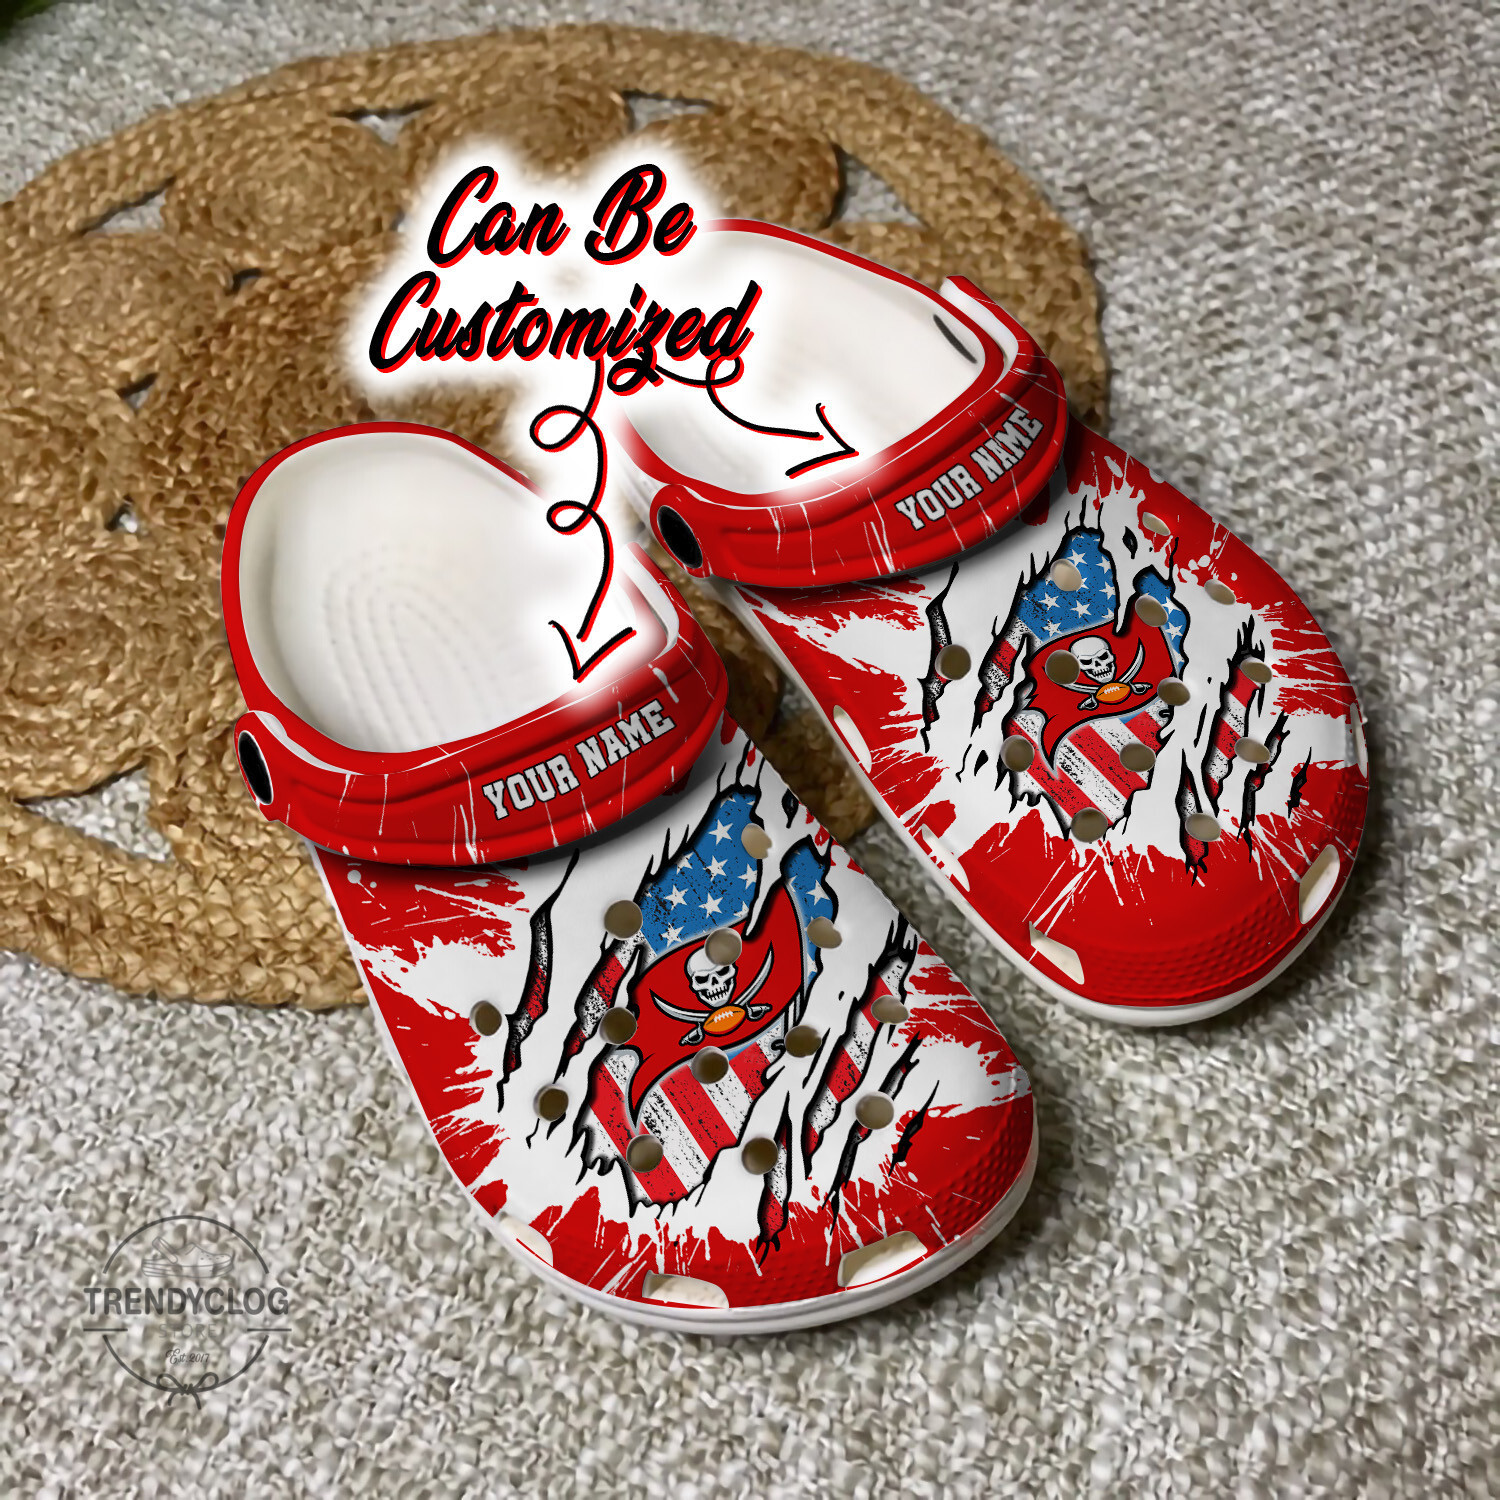 Buccaneers Crocs Personalized TB Buccaneers Football Ripped American Flag Clog Shoes